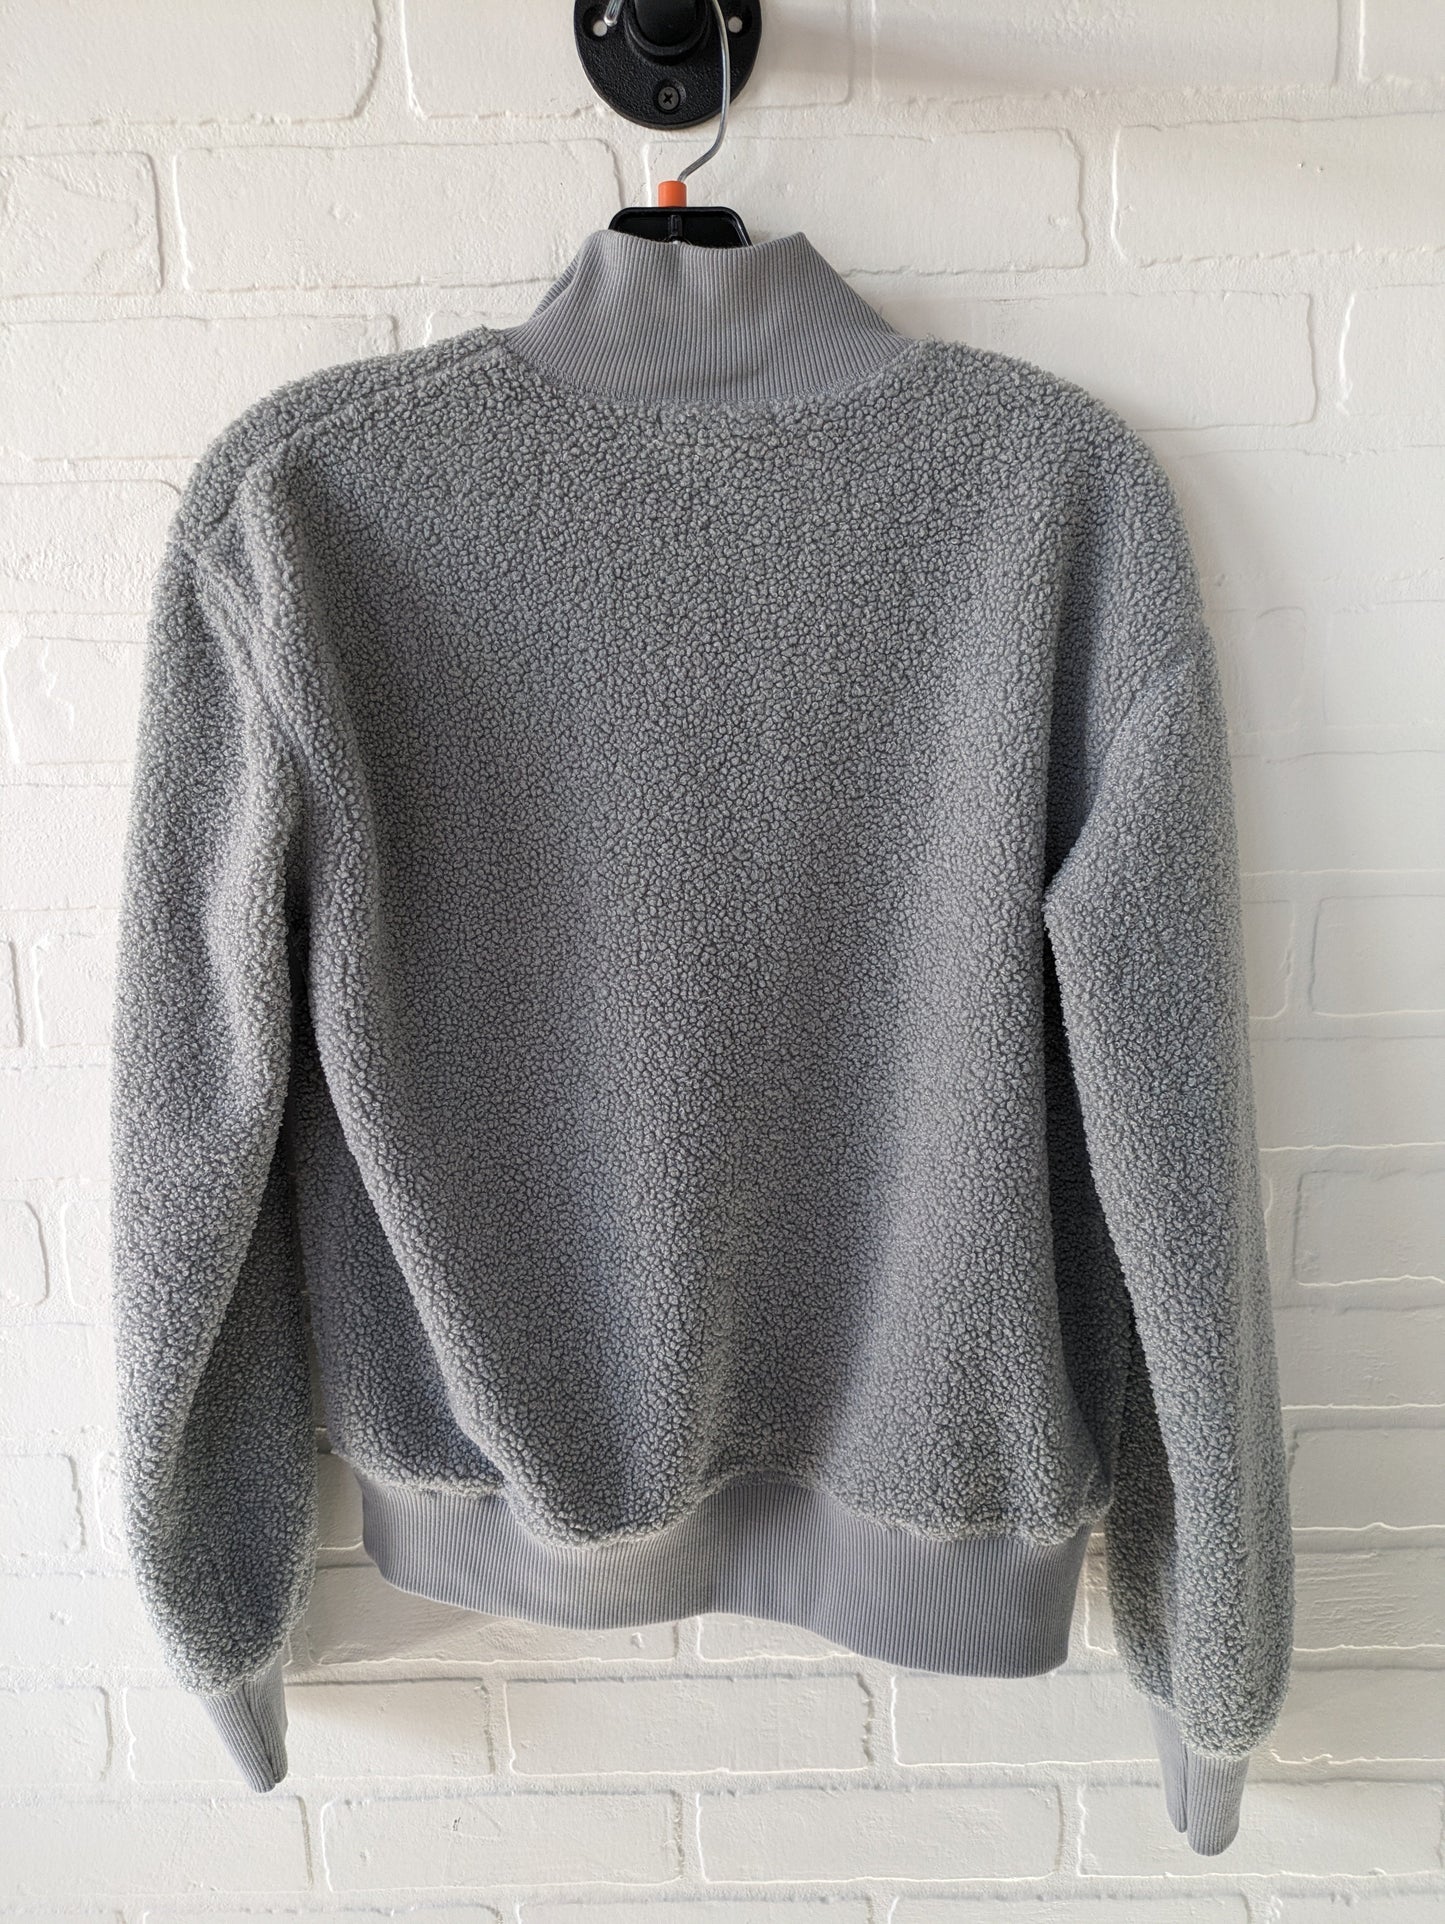 Top Long Sleeve Fleece Pullover By Top Shop  Size: Xs